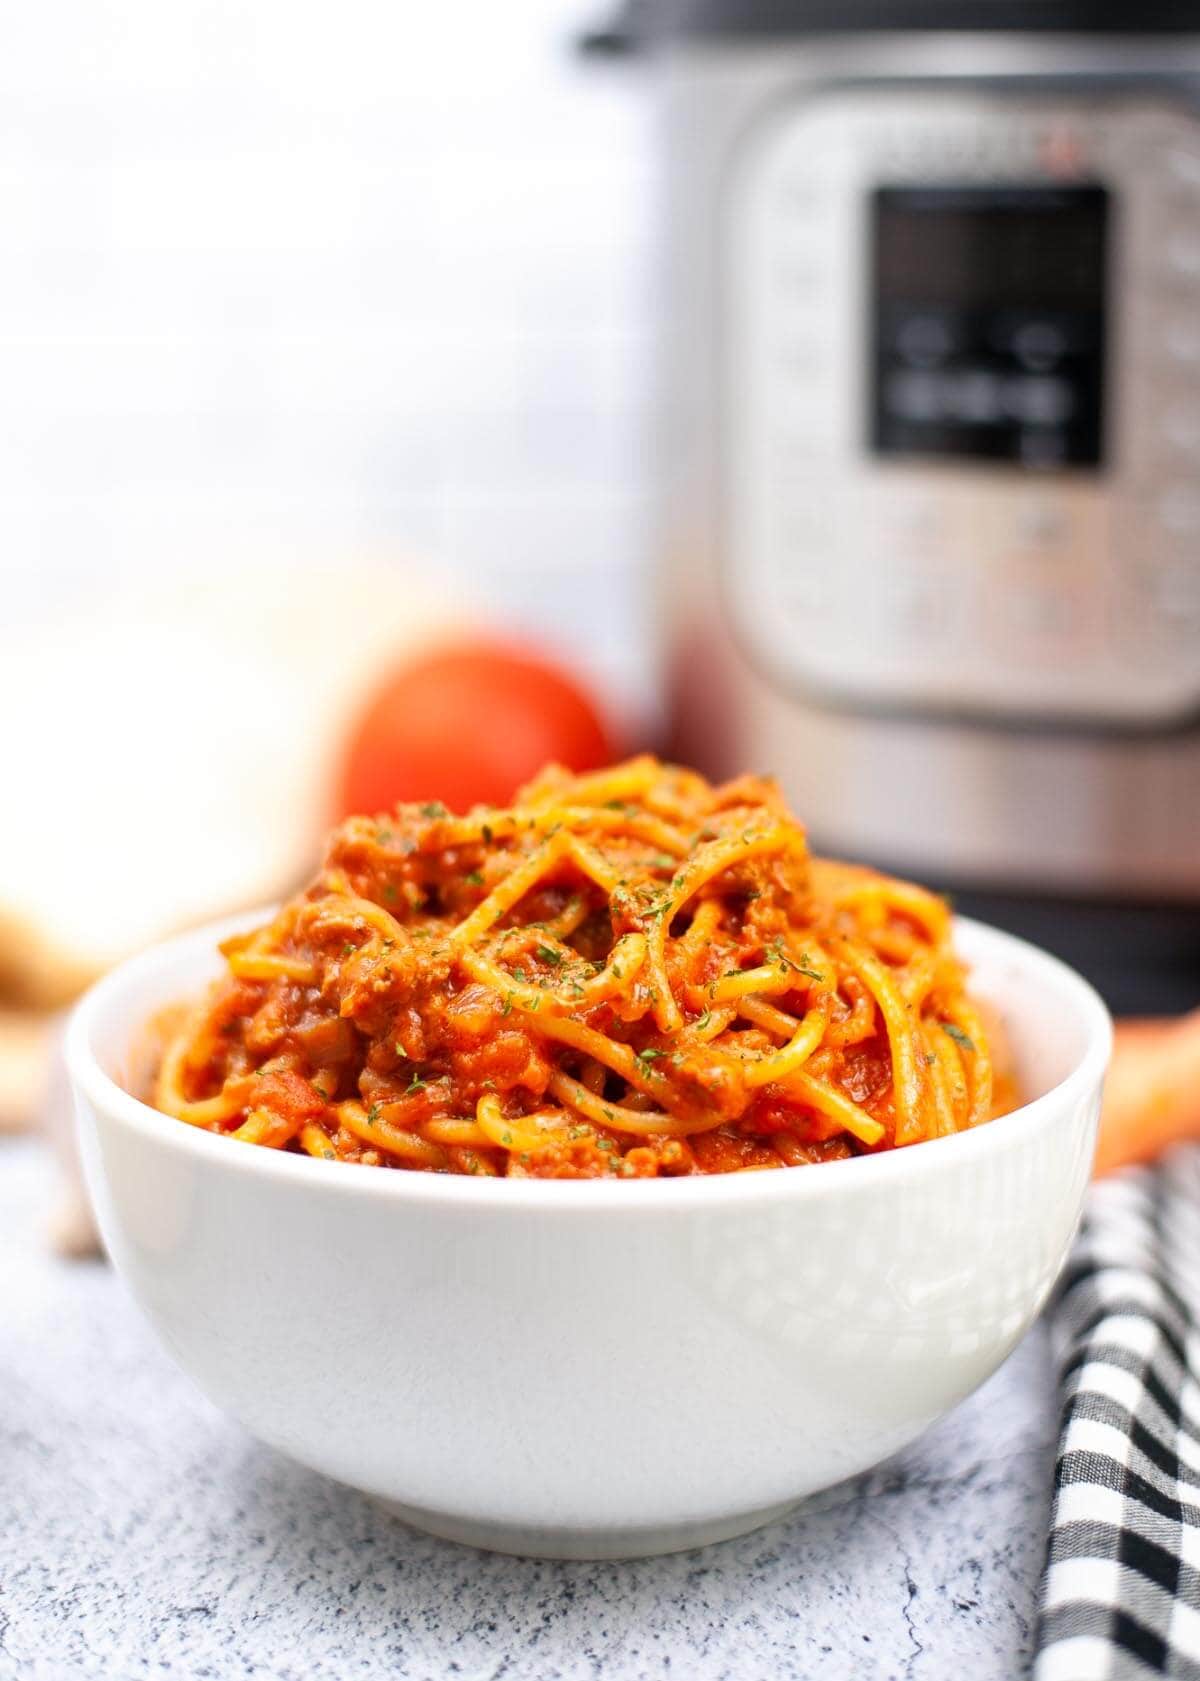 bowl of Spaghetti Bolognese in front of an IP.